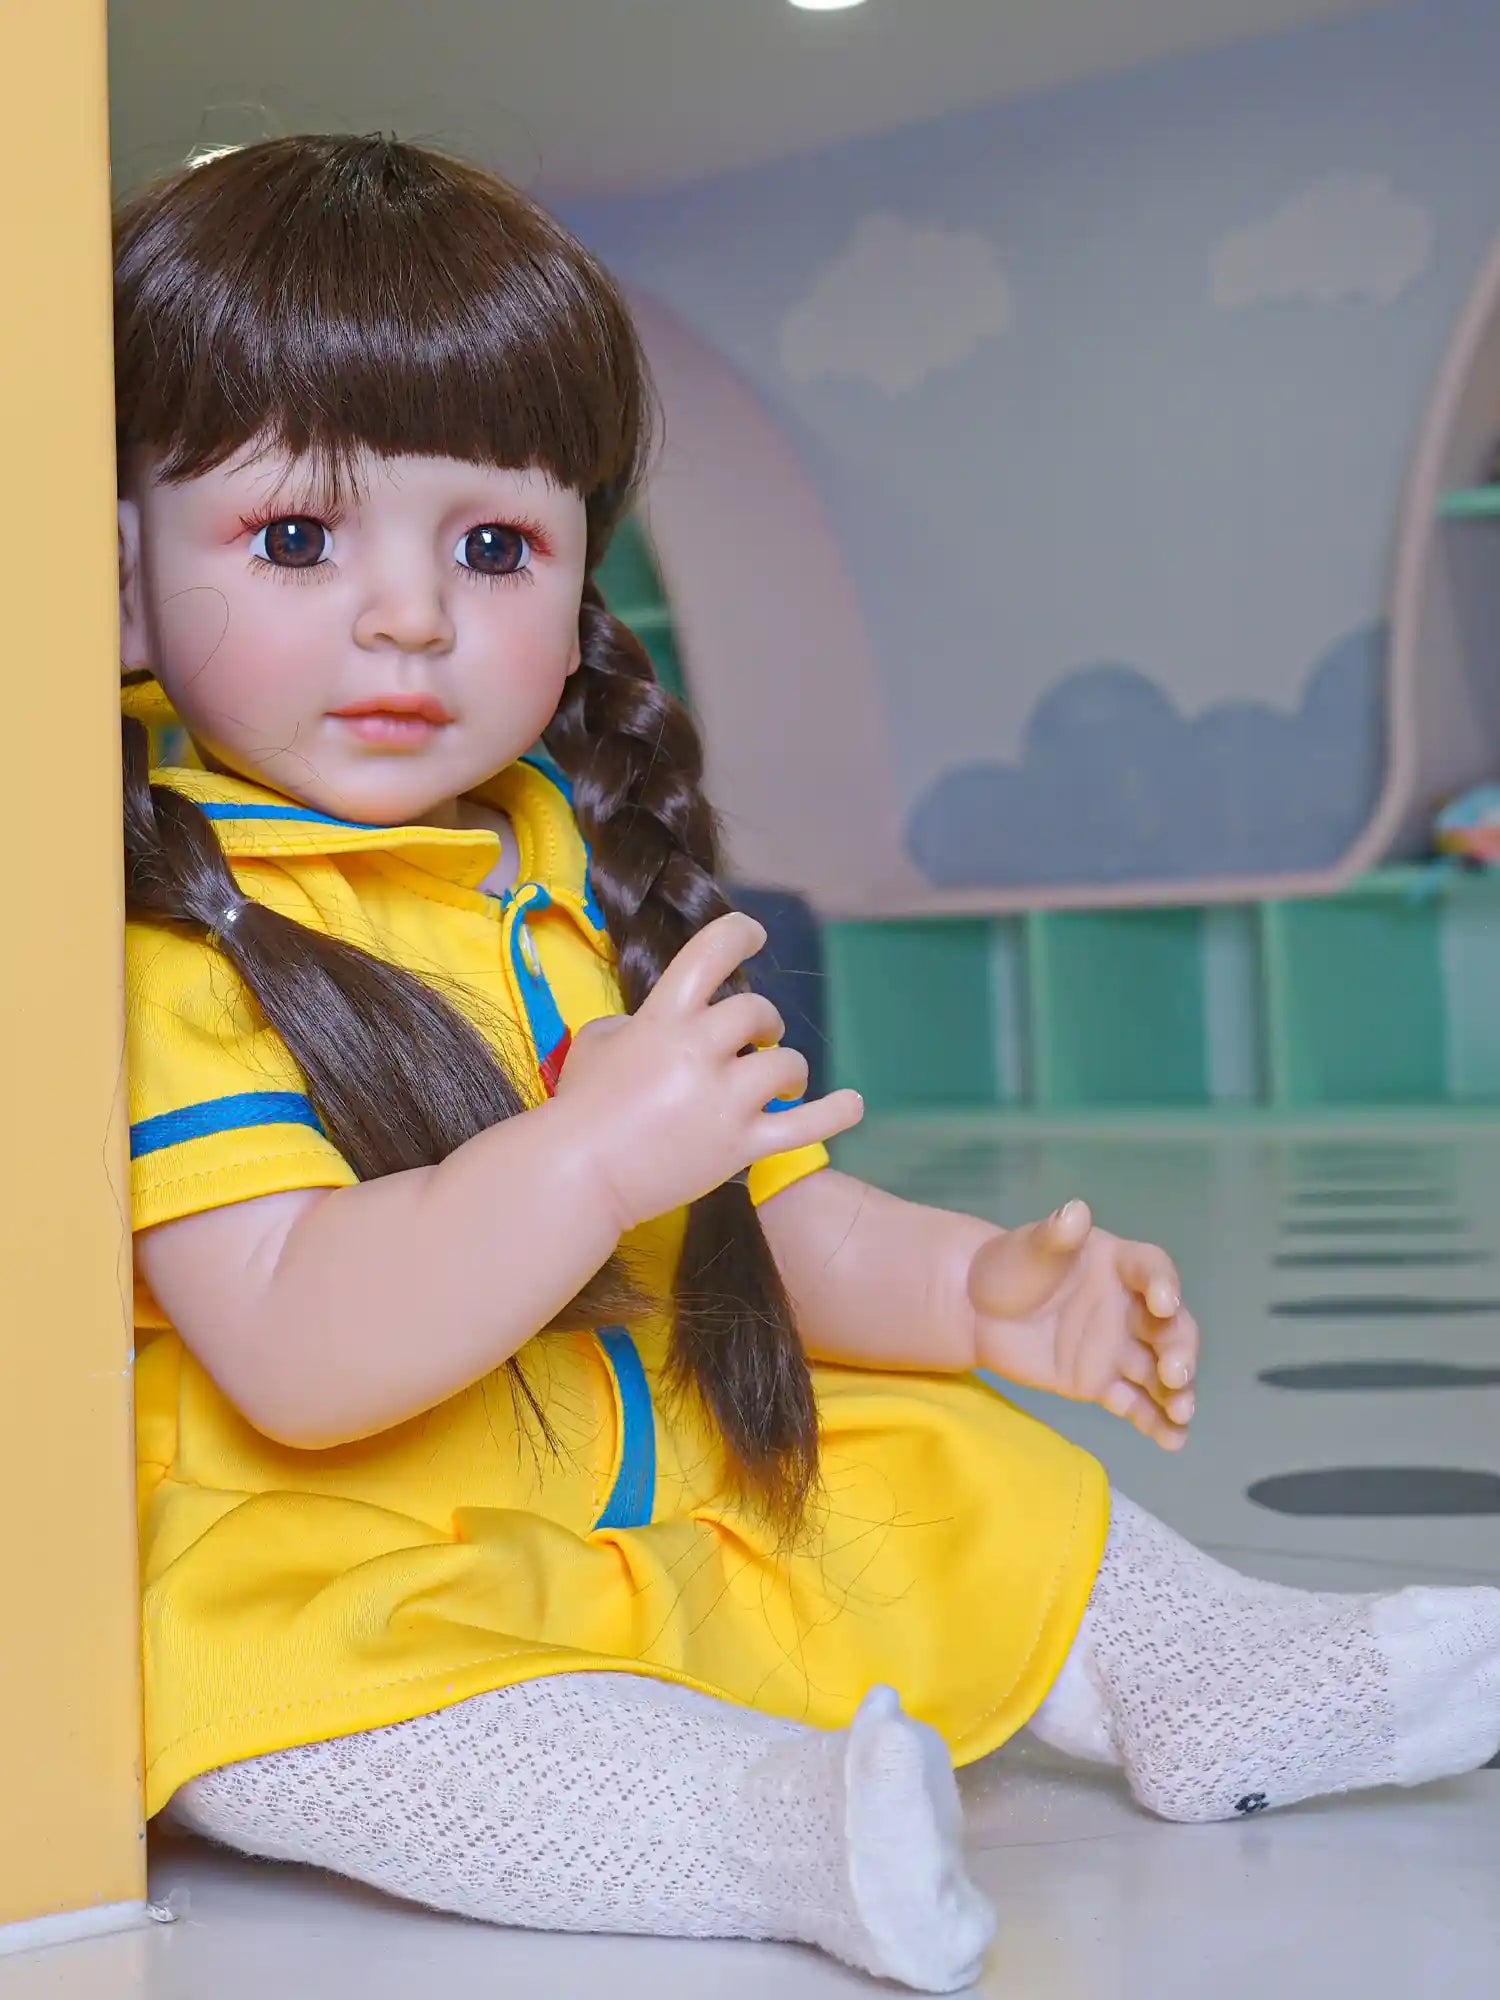 A lifelike doll, sporting a yellow dress with blue accents, sits casually against a yellow wall, complementing the colorful indoor playground.